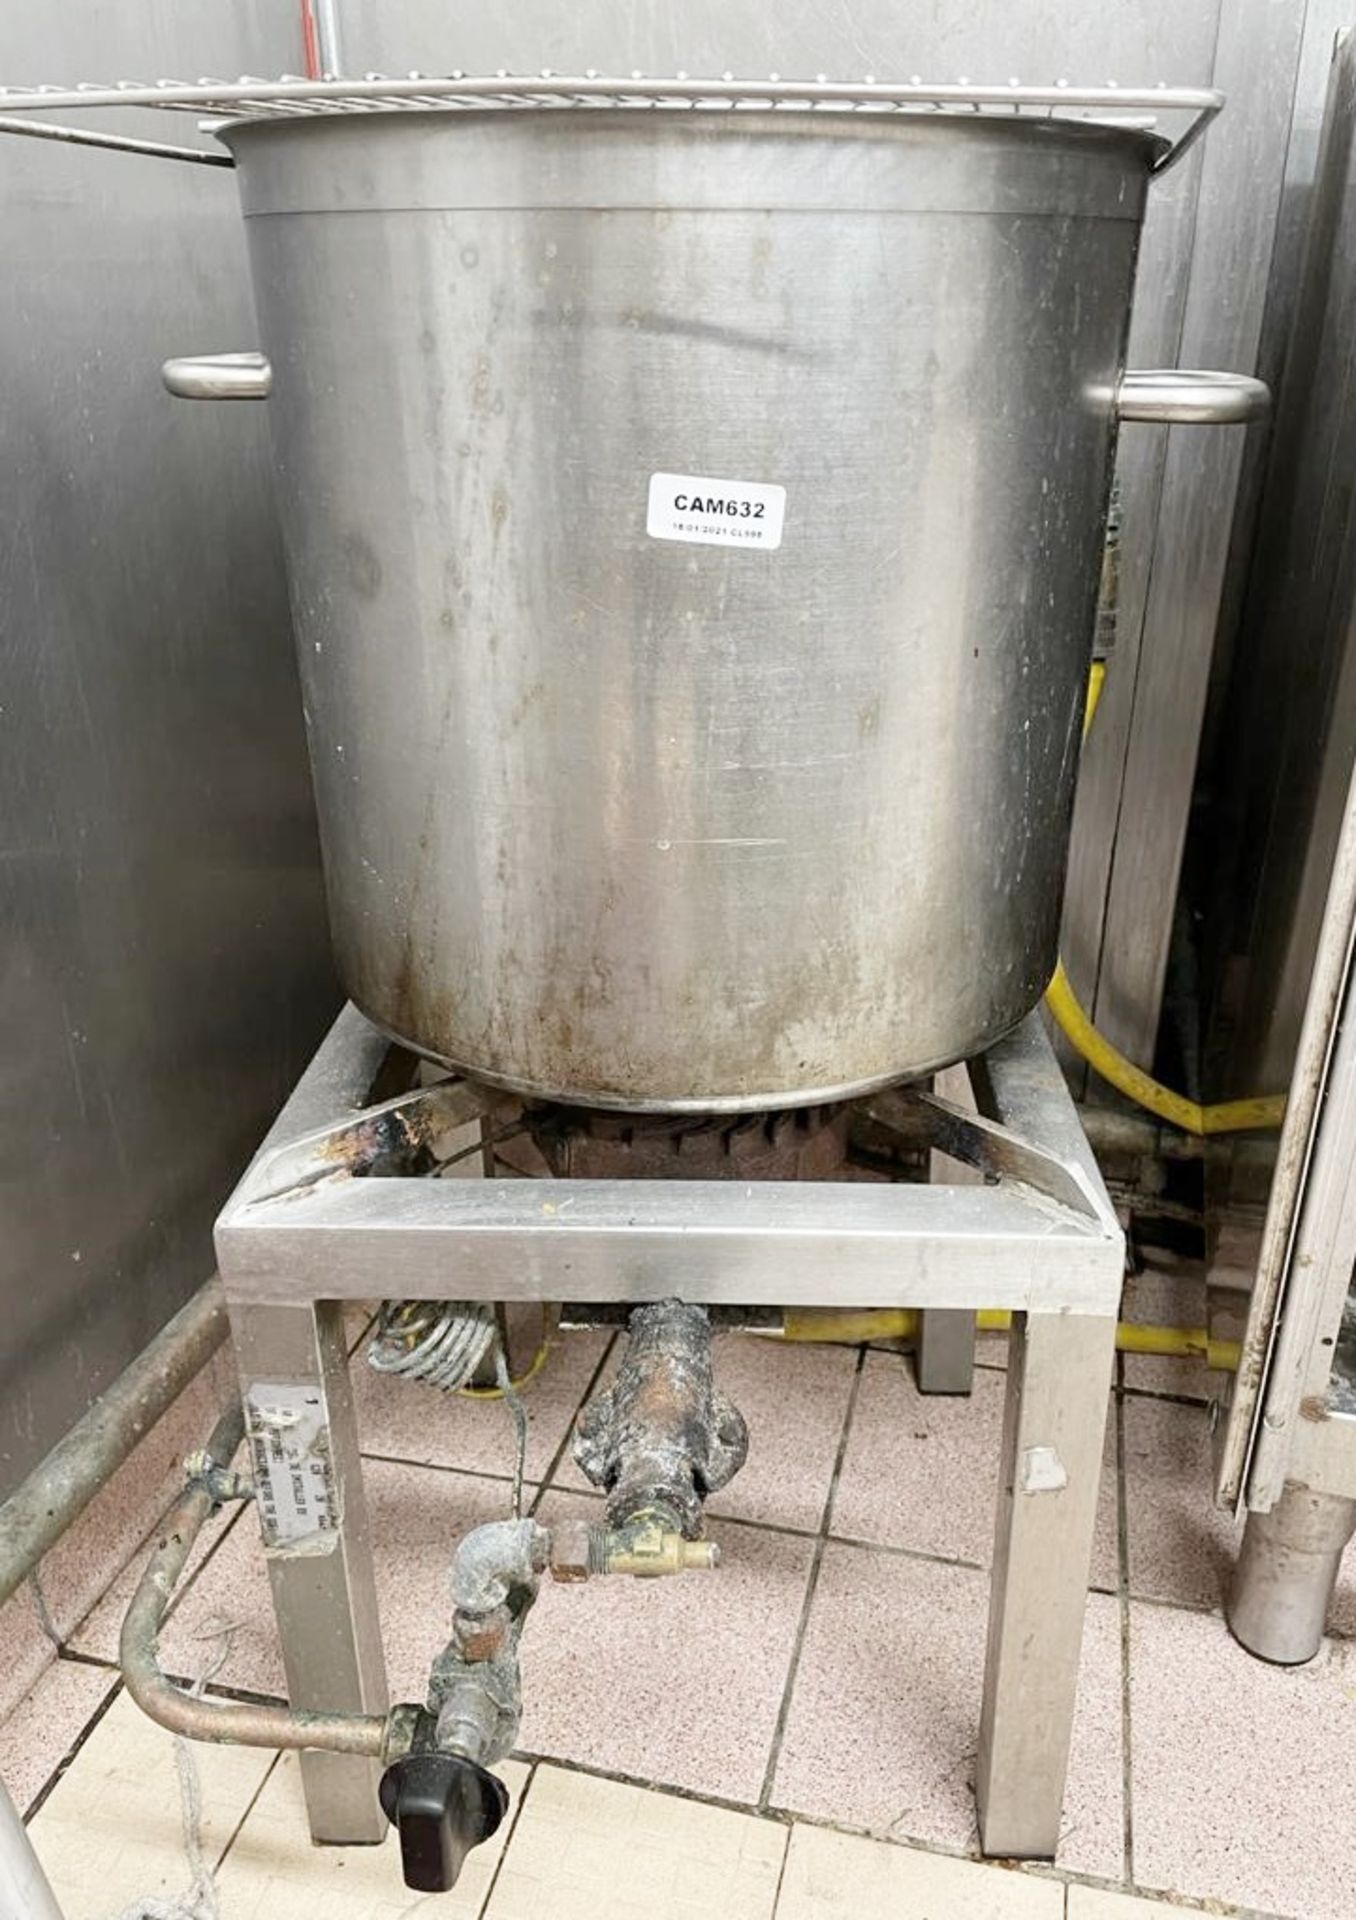 1 x Commercial Gas-powered Pasta / Rice Boiler - Ref: CAM632 - CL612 - Location: London SW1PThis